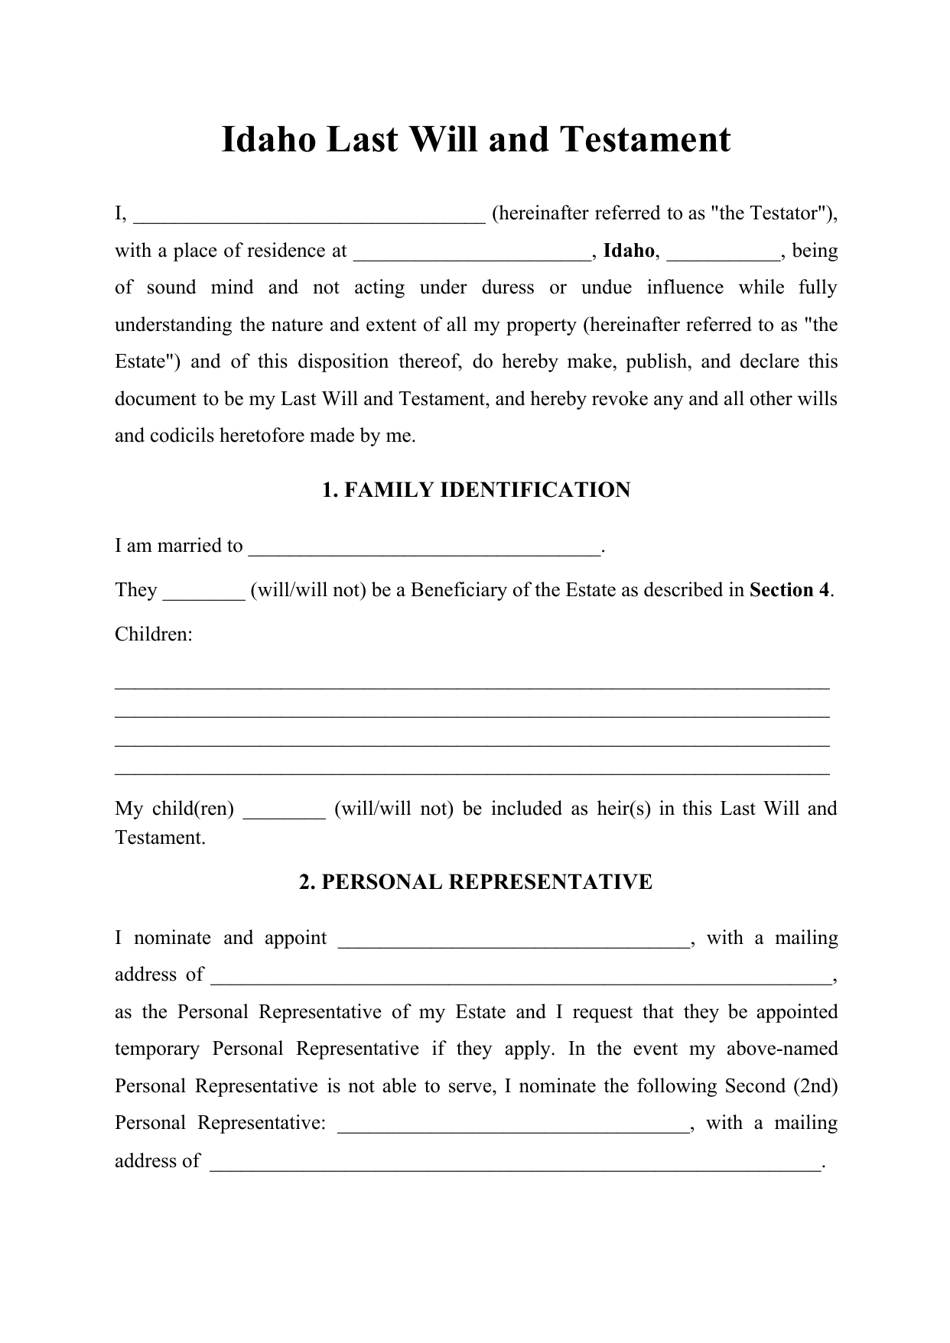 Last Will and Testament Template - Idaho